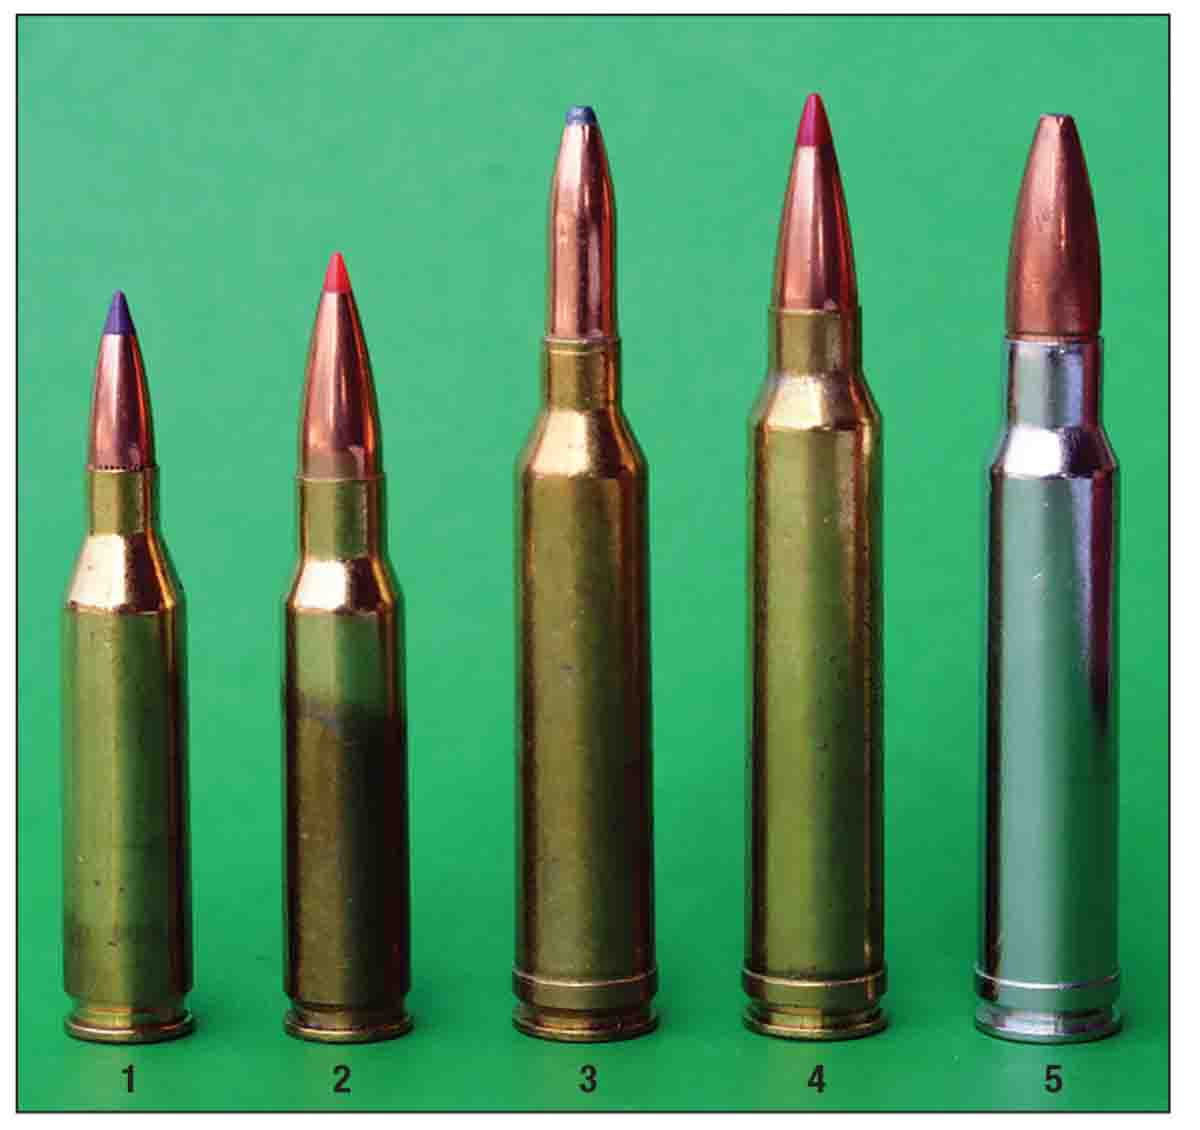 Winchester developed several modern cartridges that were first offered in the Model 70: (1) 243 Winchester, (2) 308 Winchester, (3) 264, (4) 300, (5) 338 and (not shown) the 458 Winchester Magnums. These cartridges were ahead of their time and remain widely popular today.